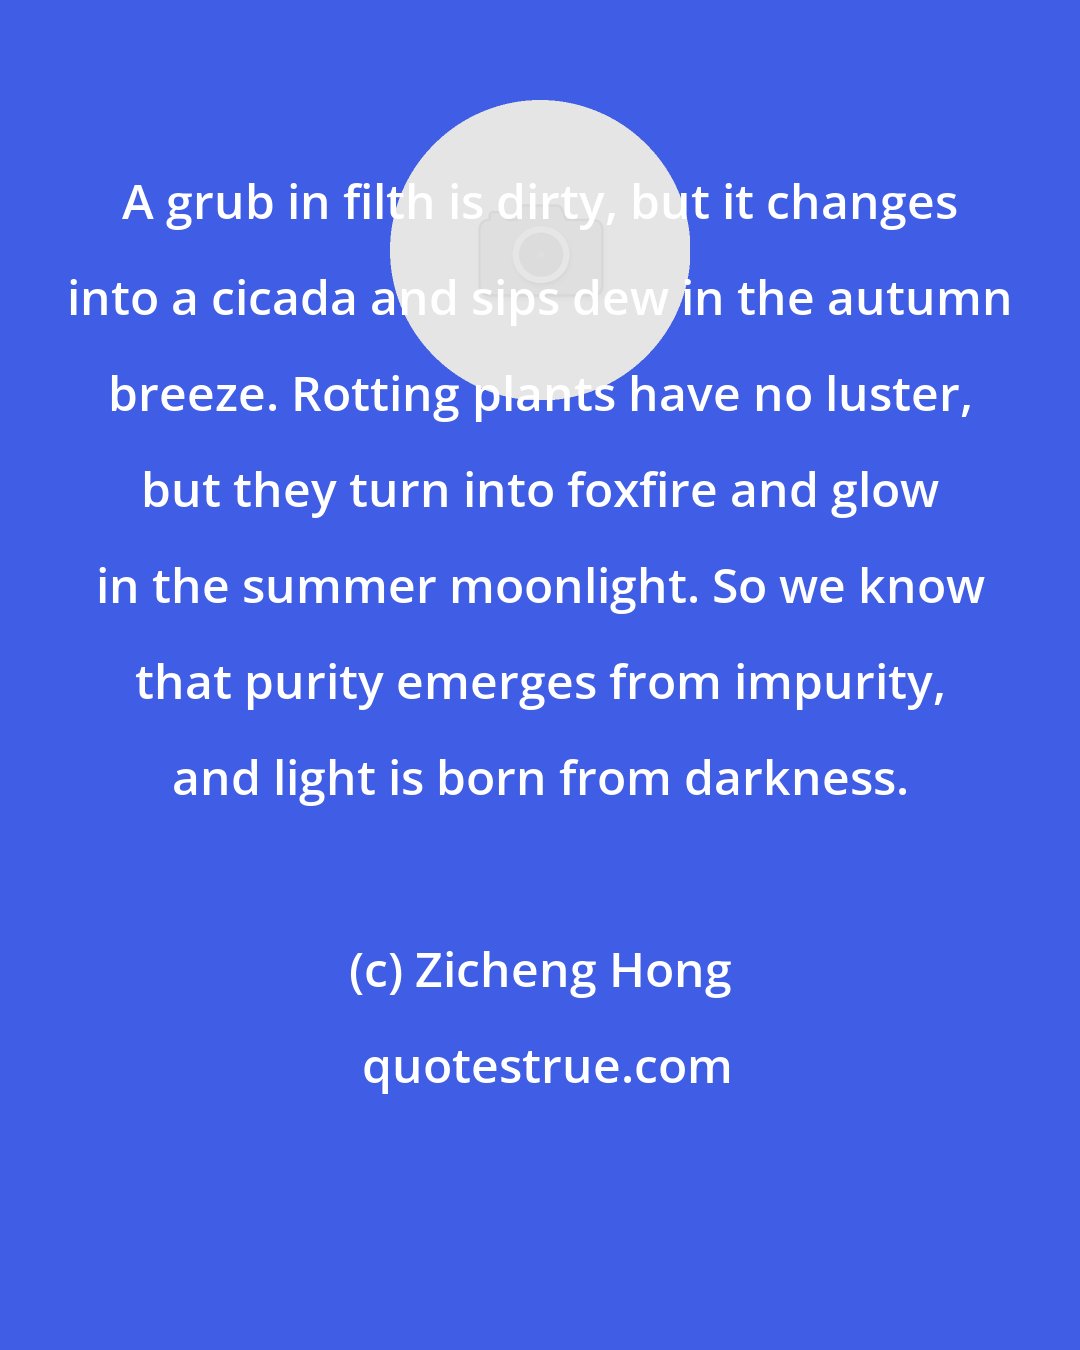 Zicheng Hong: A grub in filth is dirty, but it changes into a cicada and sips dew in the autumn breeze. Rotting plants have no luster, but they turn into foxfire and glow in the summer moonlight. So we know that purity emerges from impurity, and light is born from darkness.